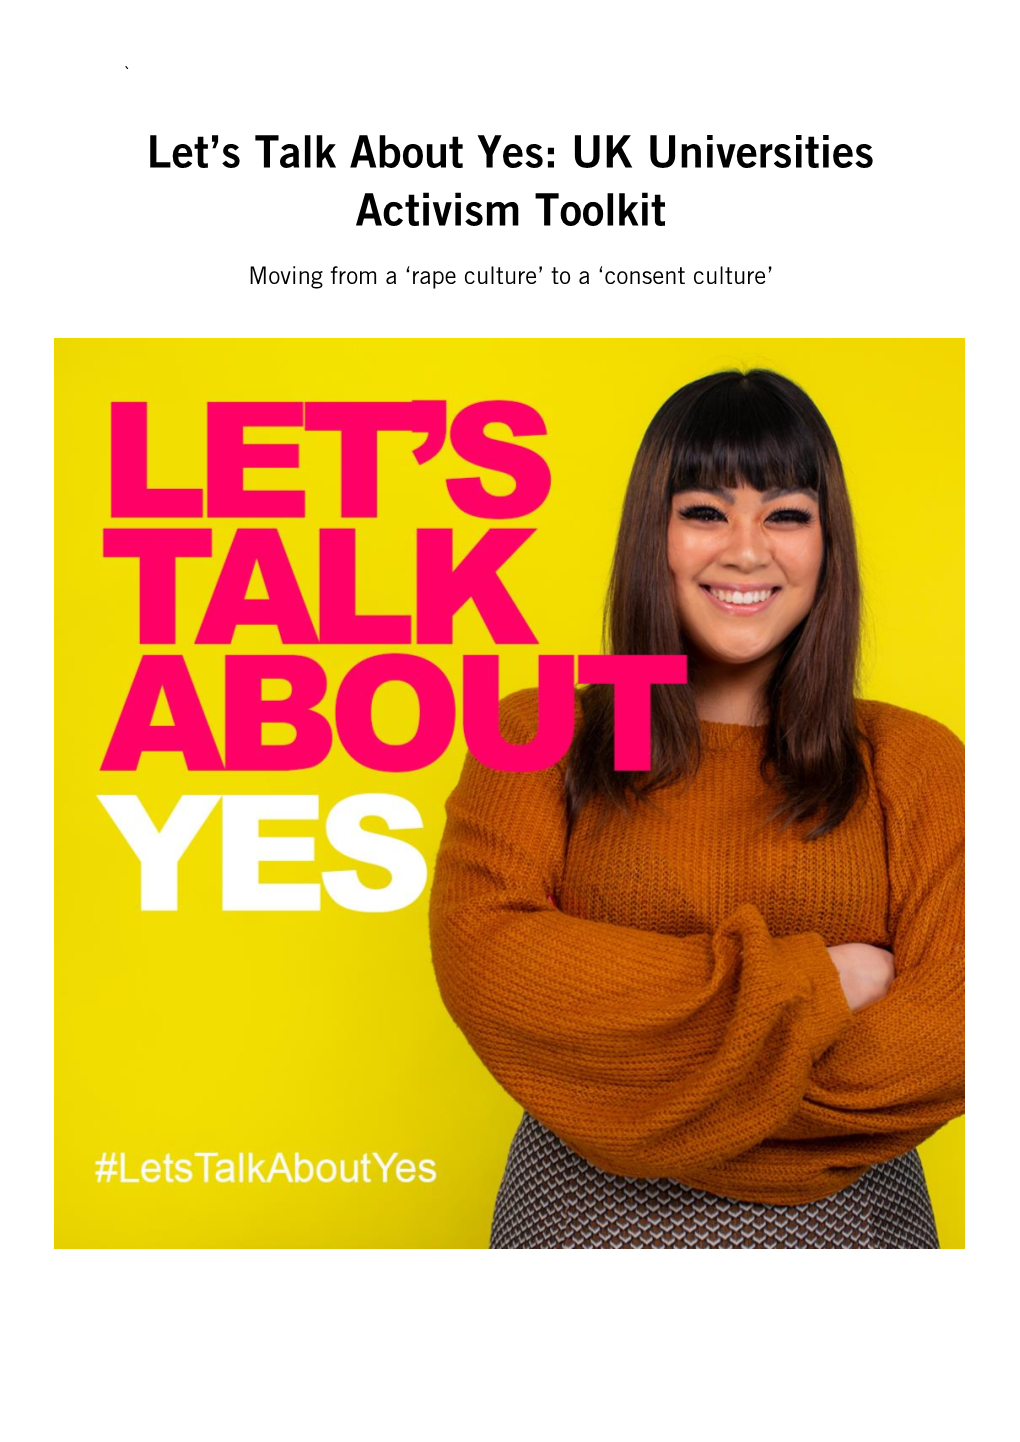 Let's Talk About Yes: UK Universities Activism Toolkit